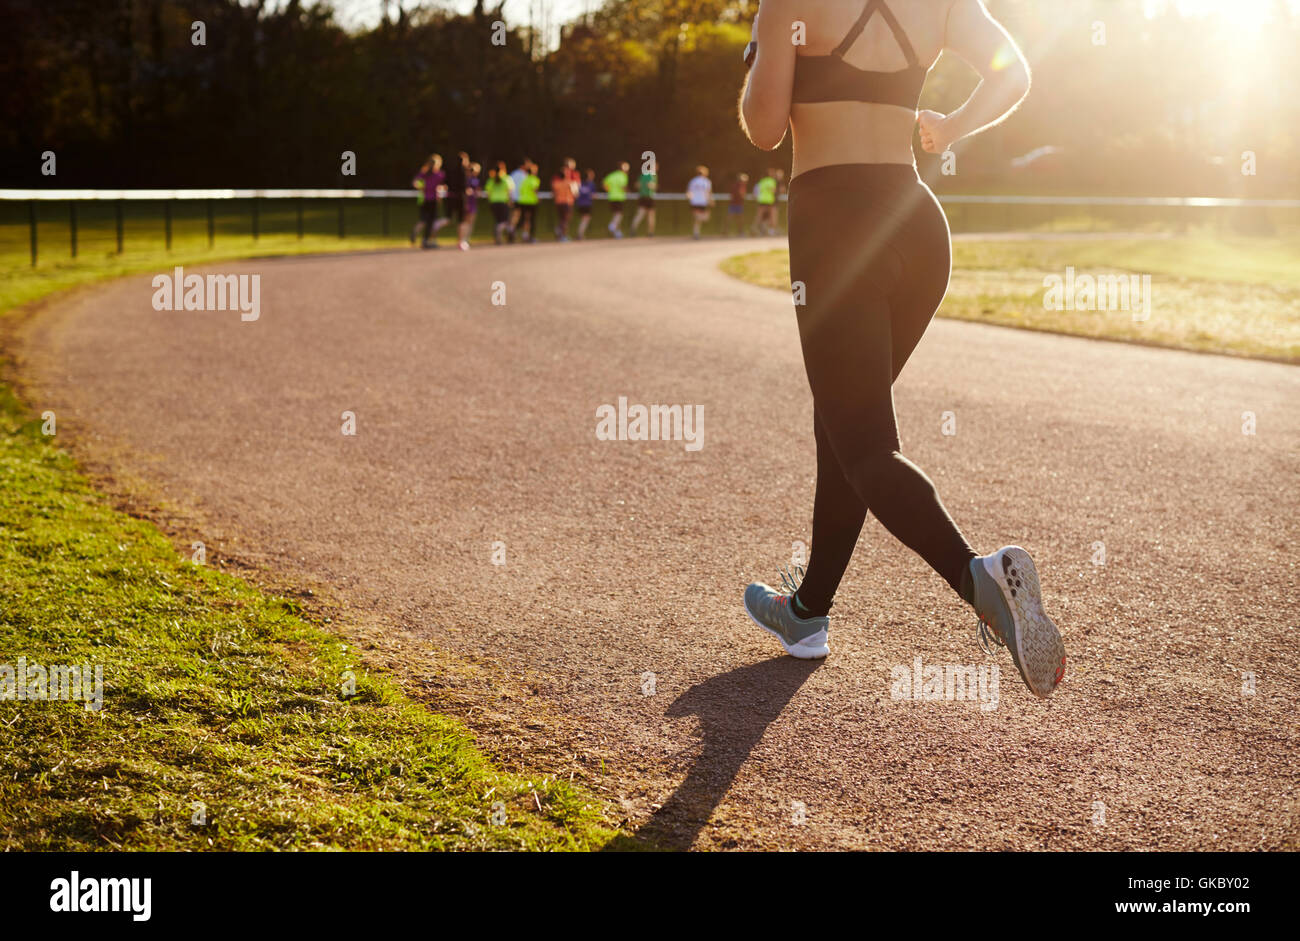 Close Up Of Woman Exercising On Outdoor Running Track Stock Photo